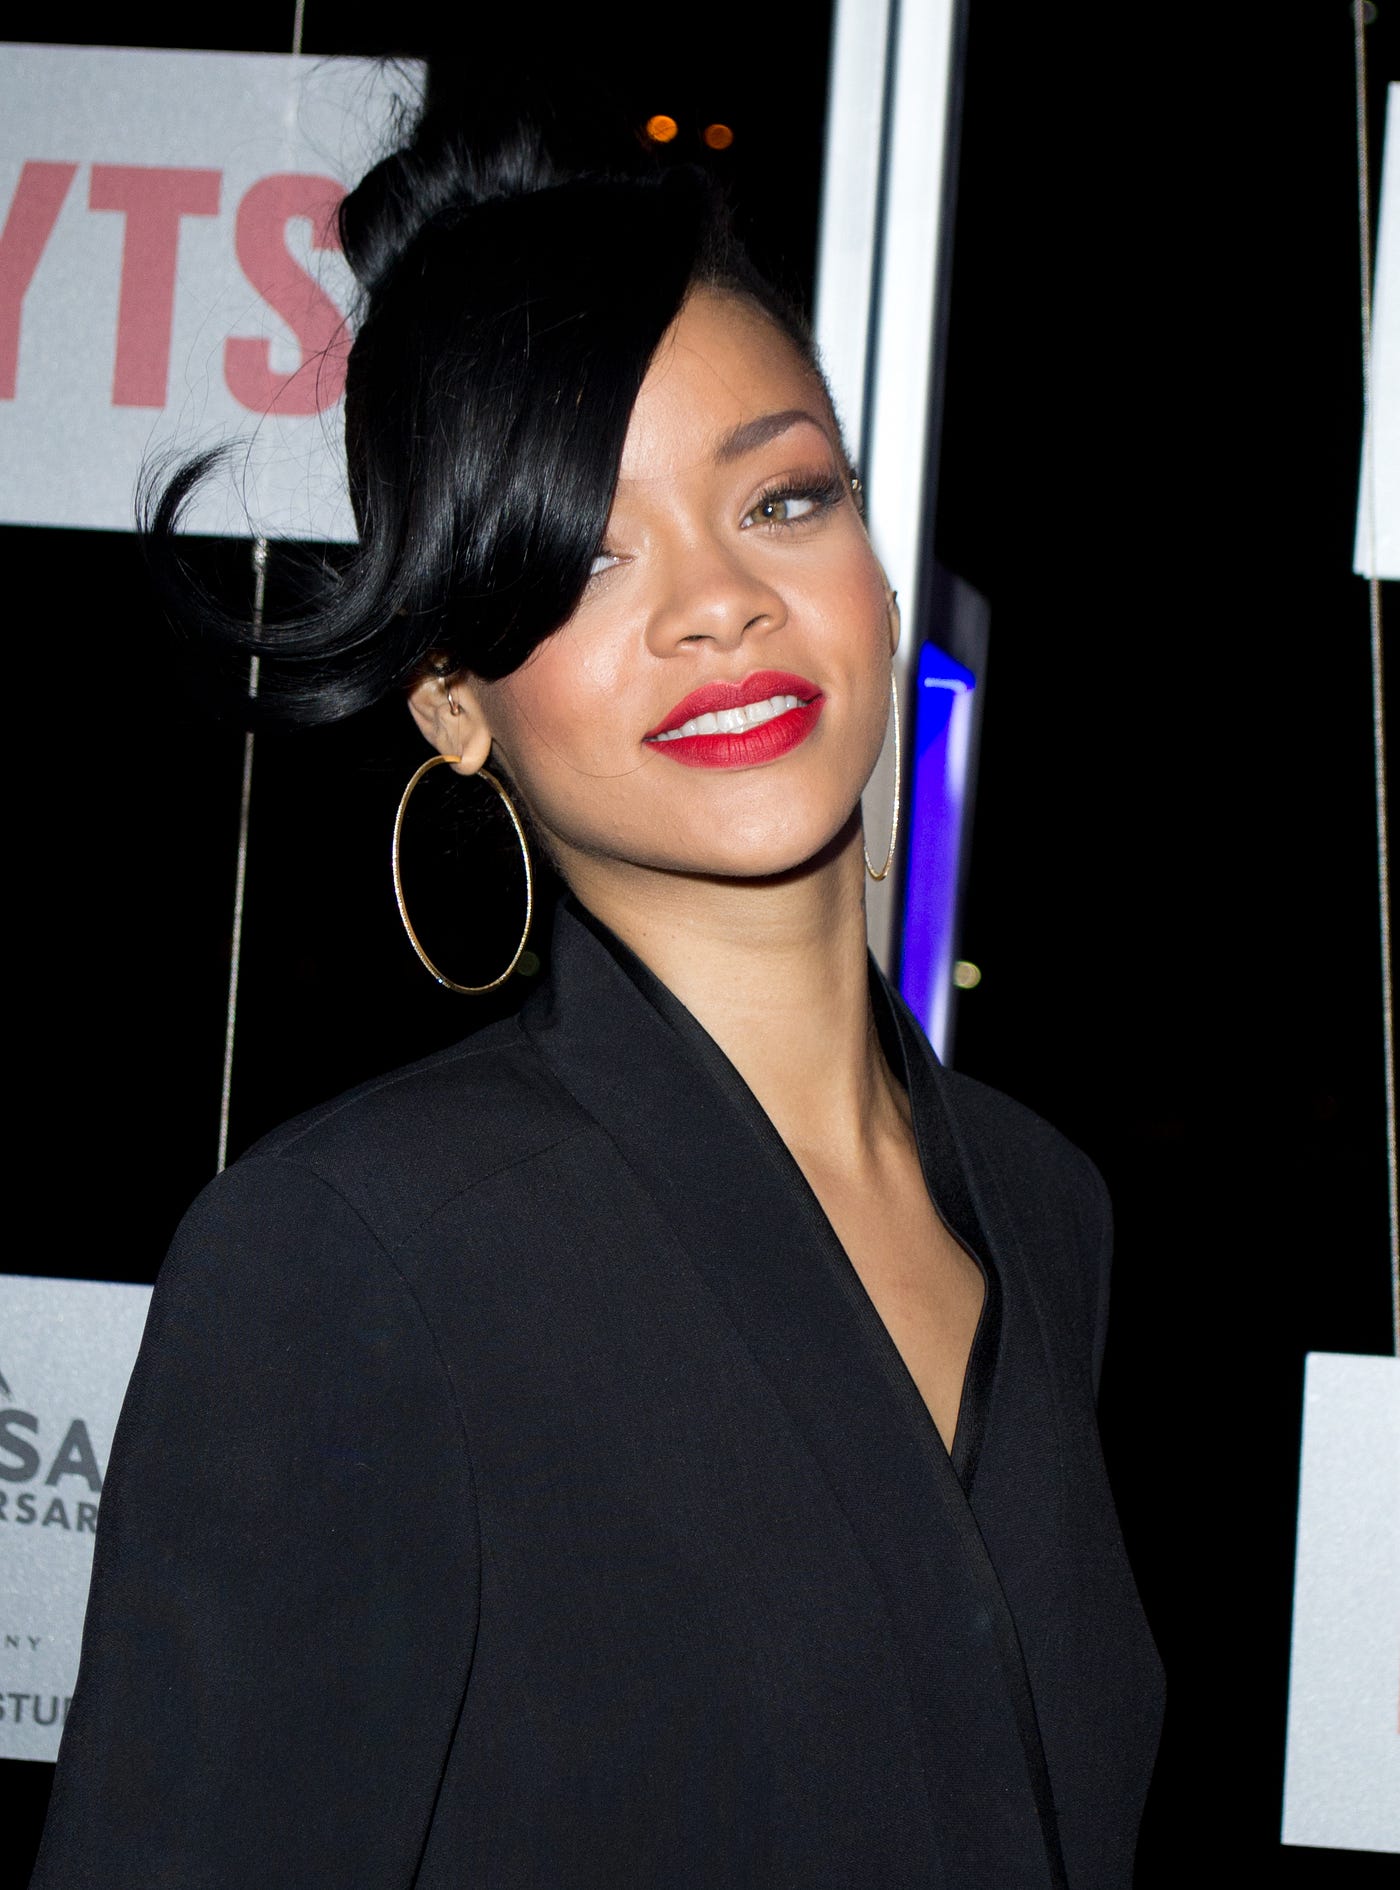 Rihanna wants to cheer up a troubled world with fashion show